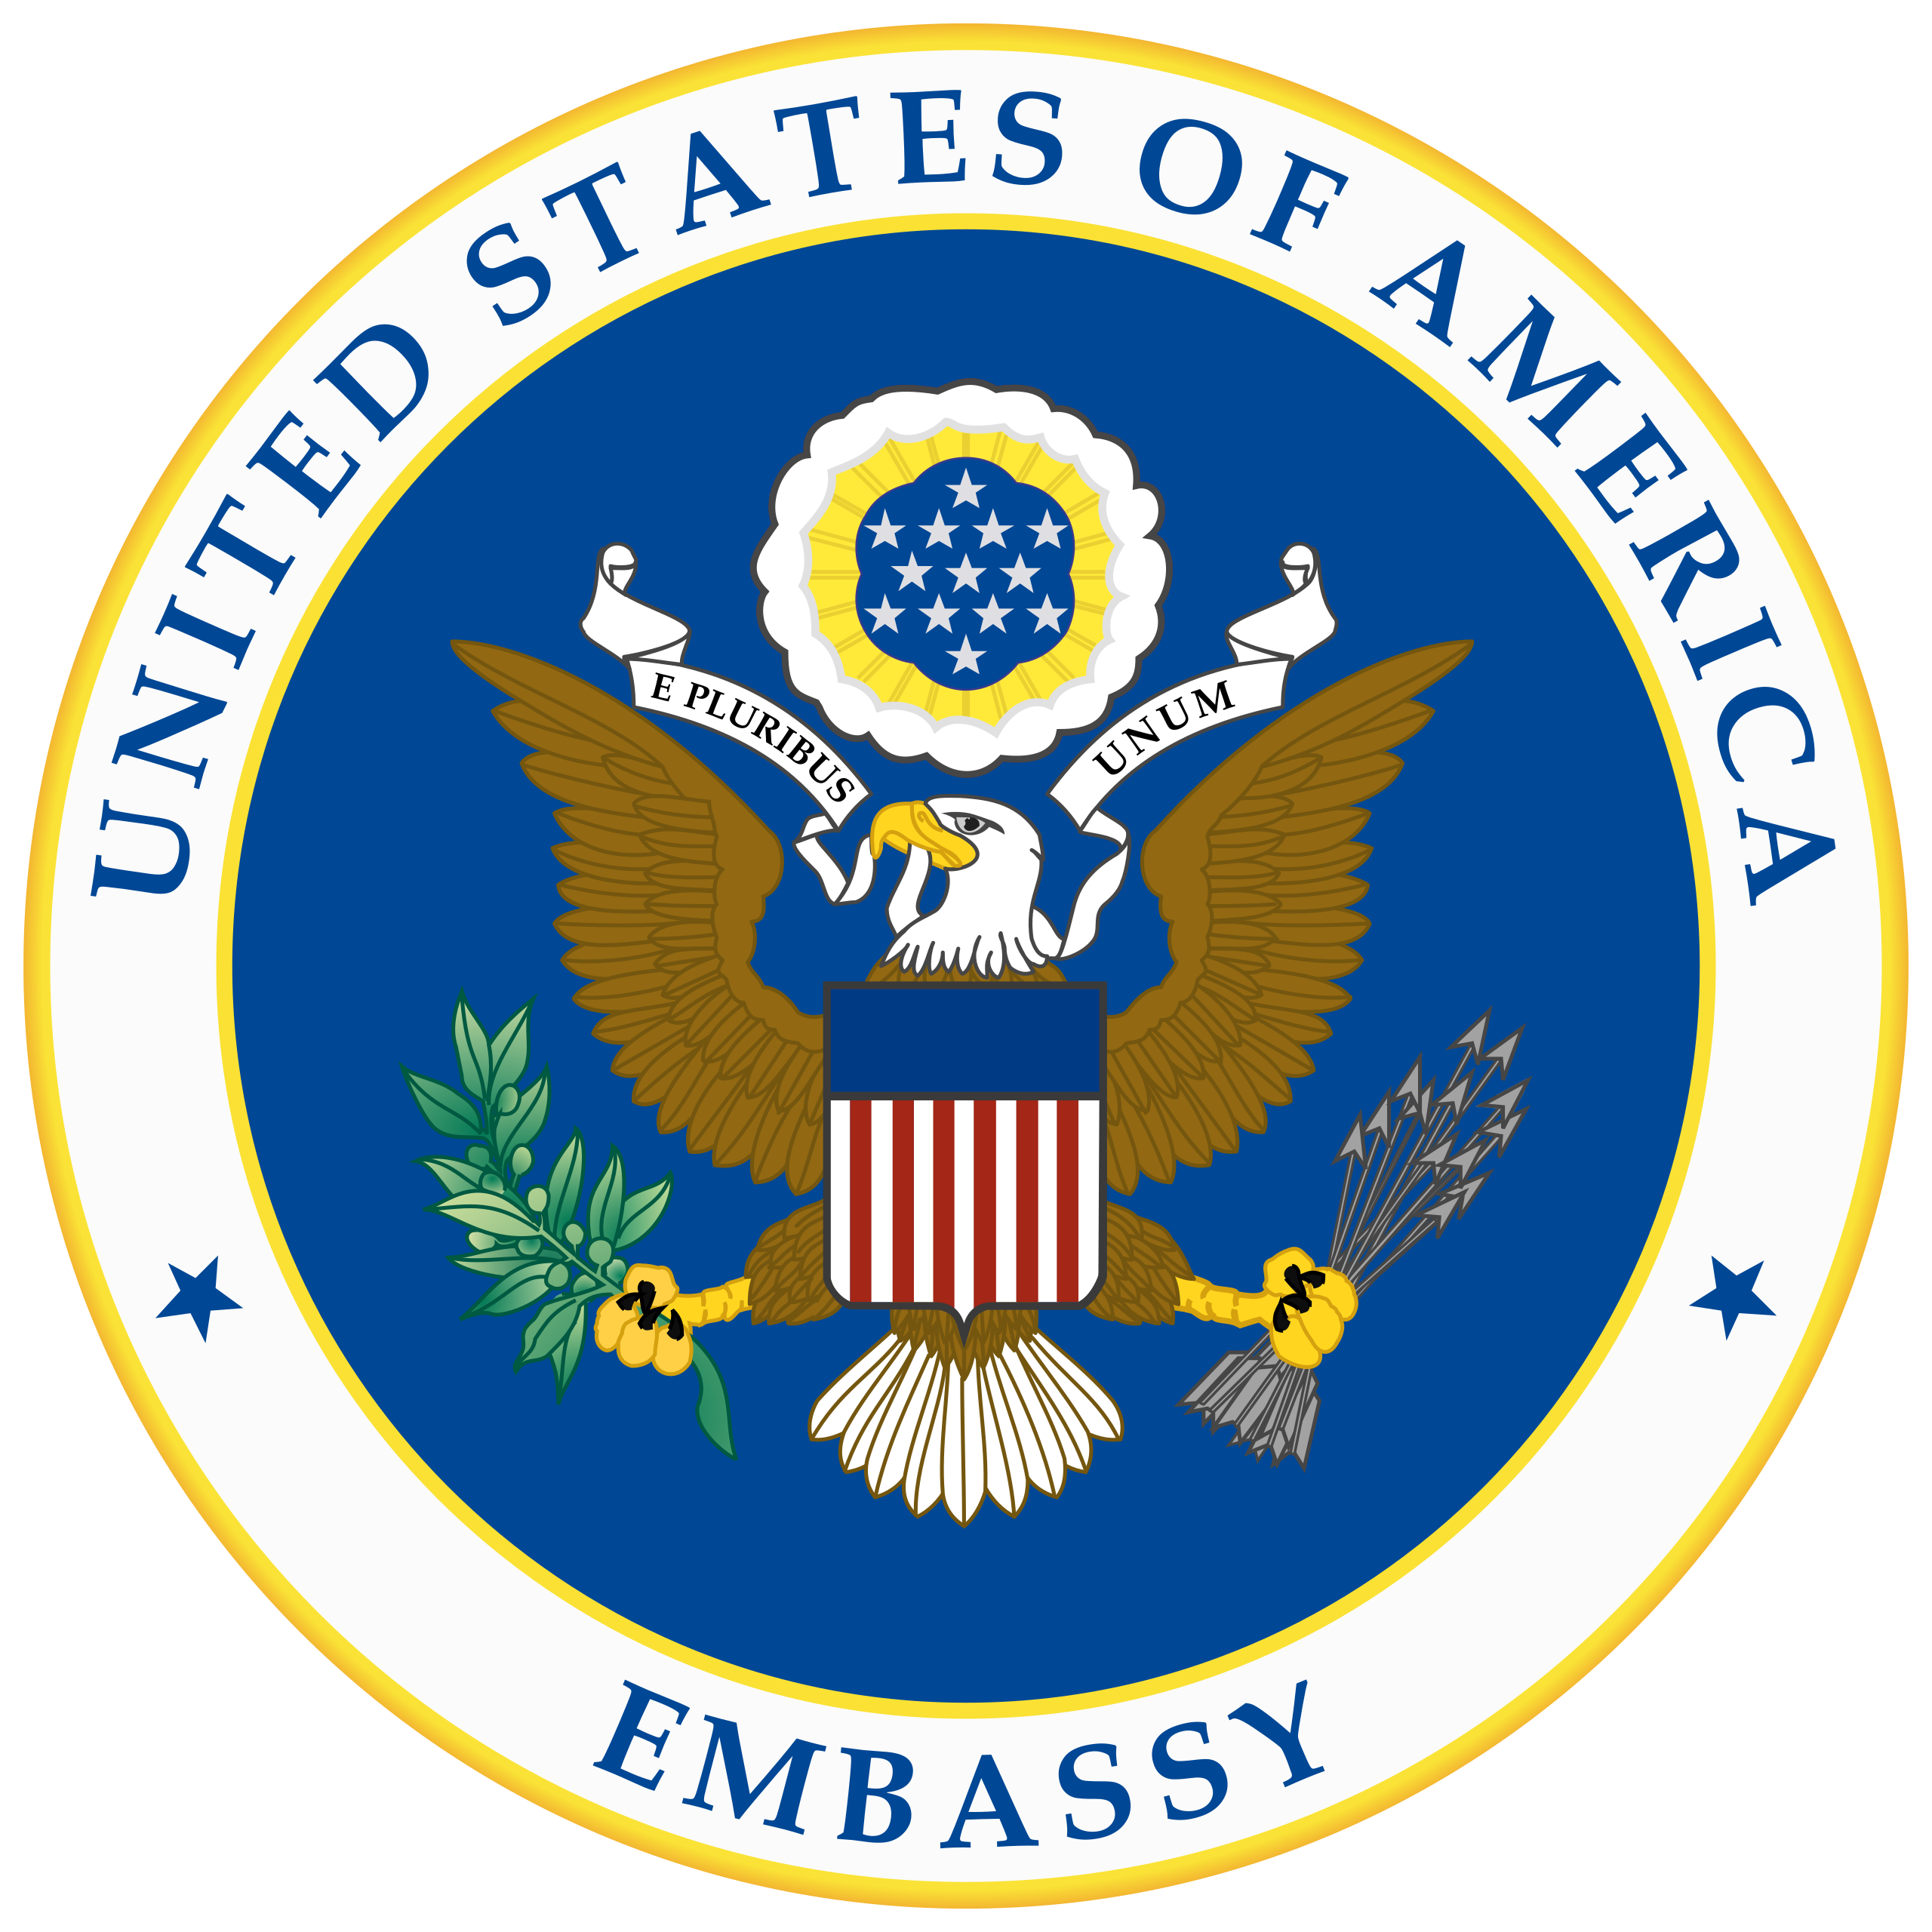 United States of America Embassy seal